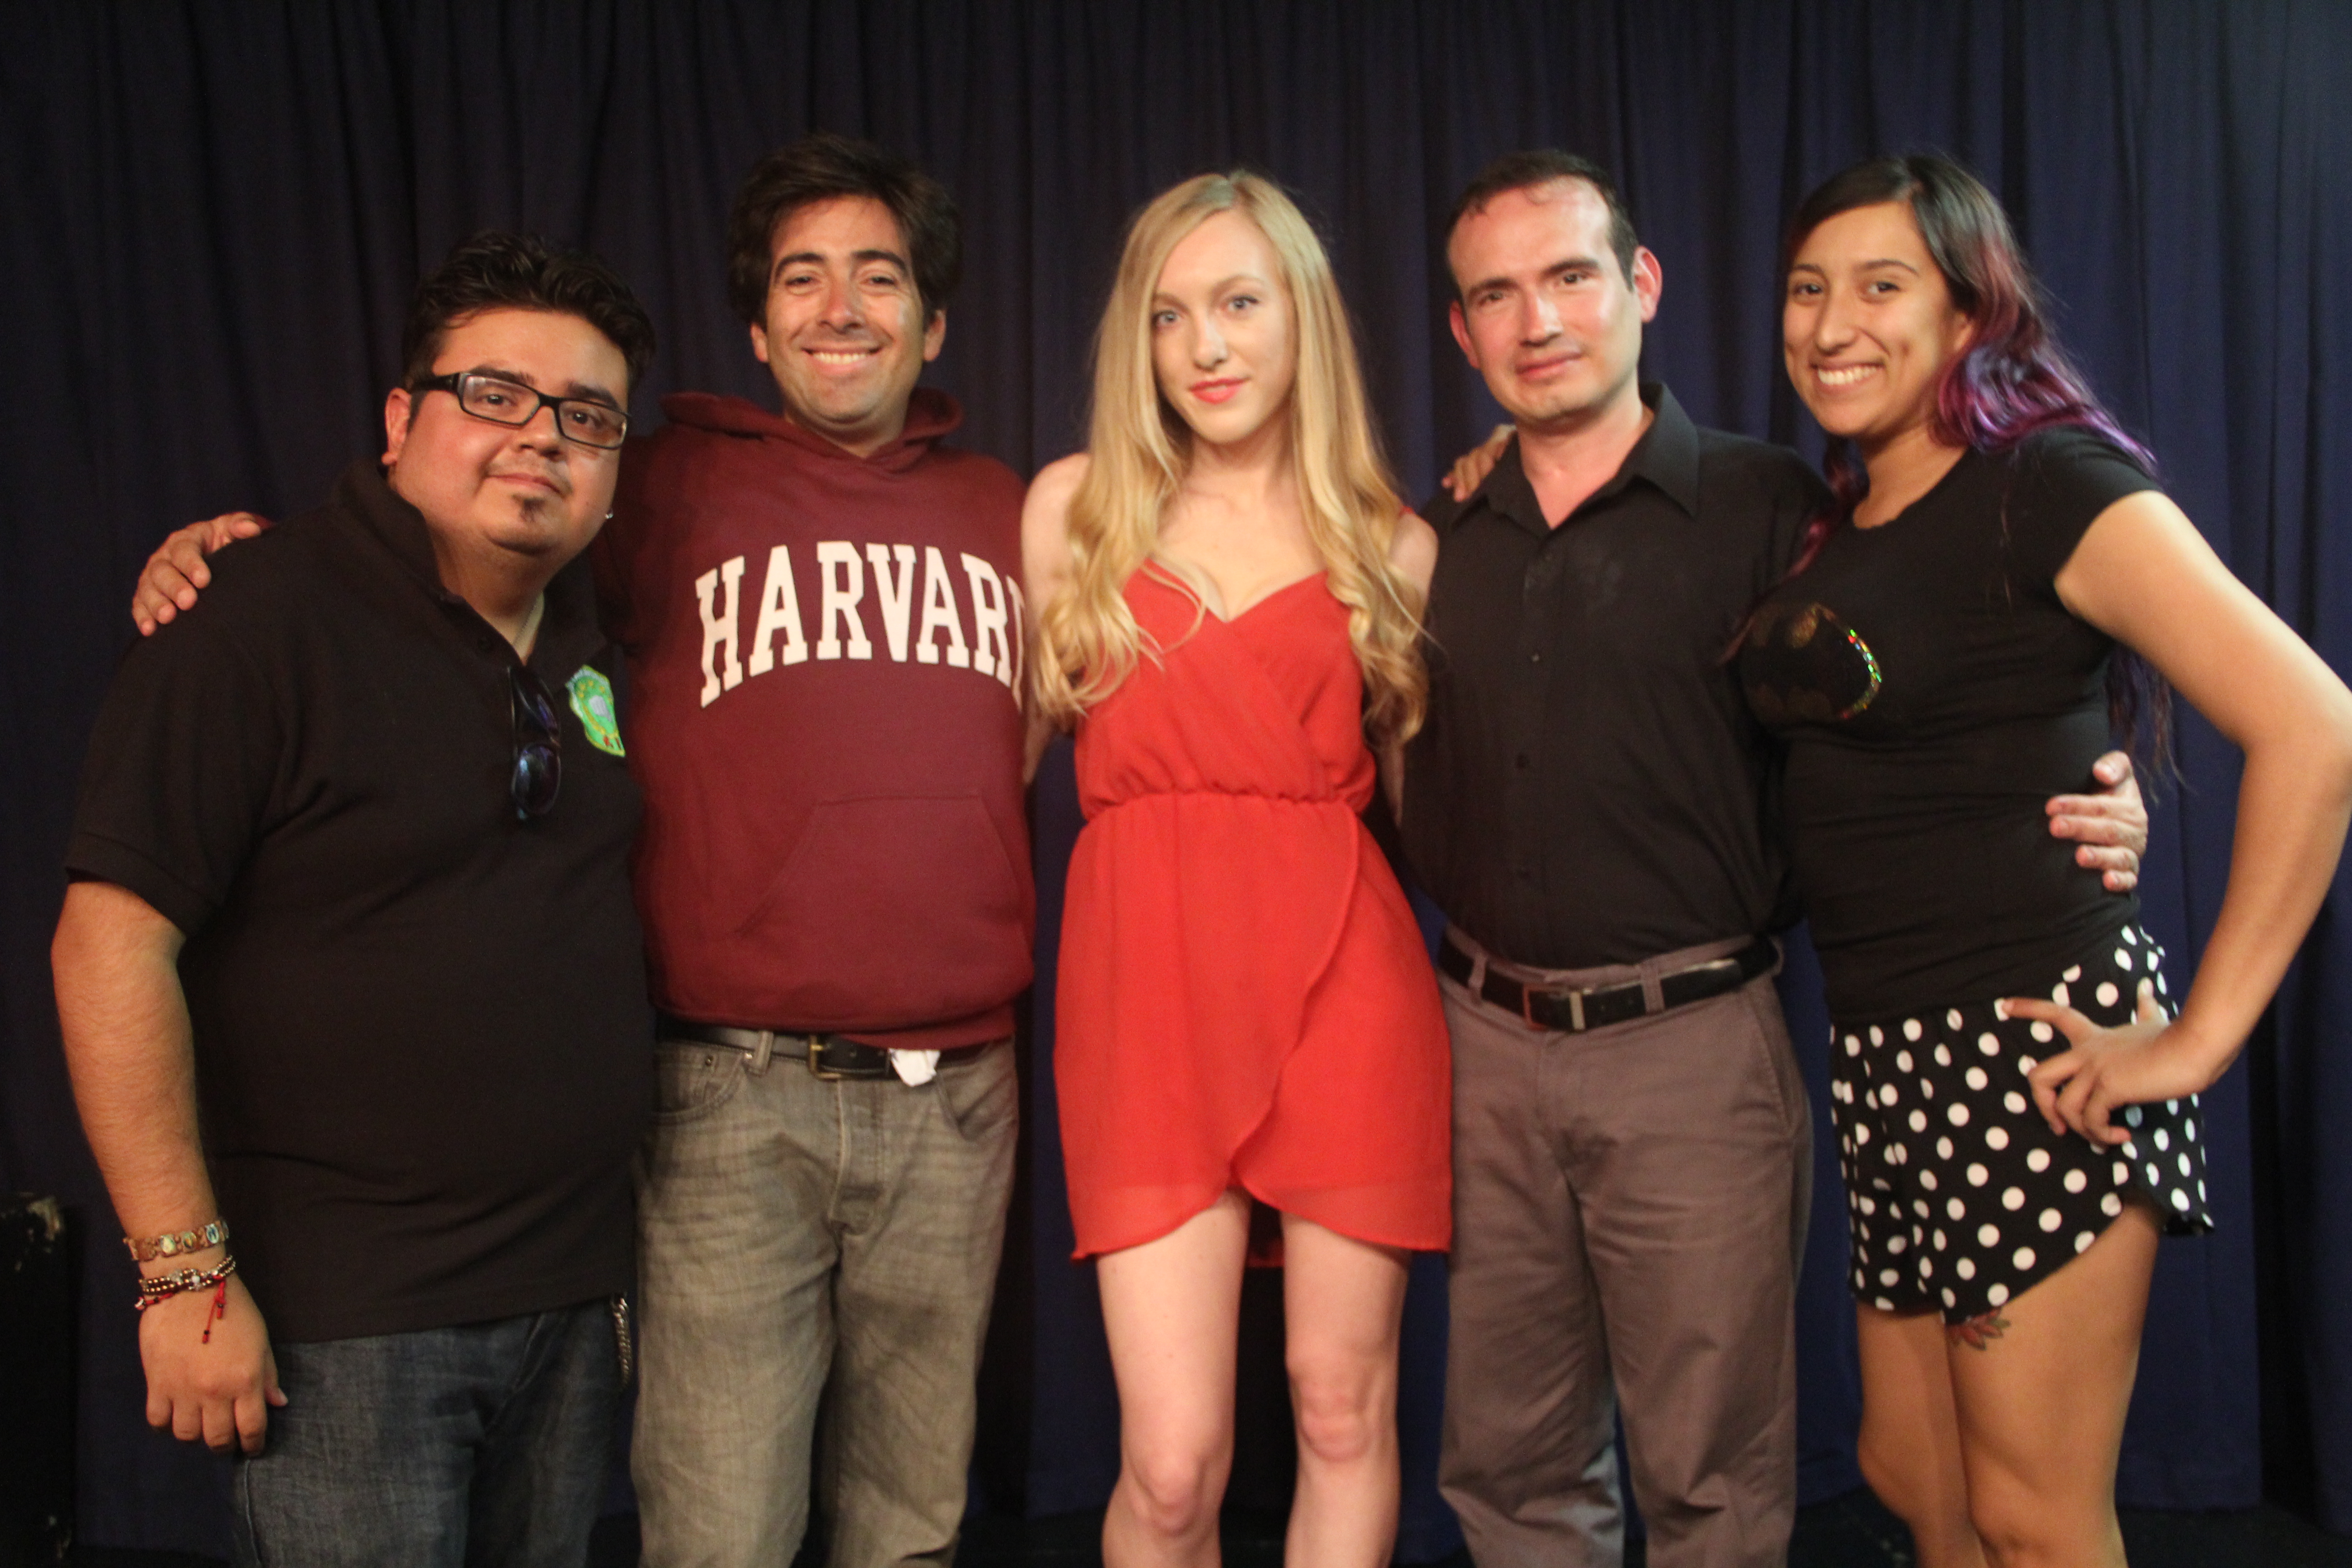 Pedro Araneda with his students of the International Institute of Film & Acting IFA and actress Chelsii Carter.